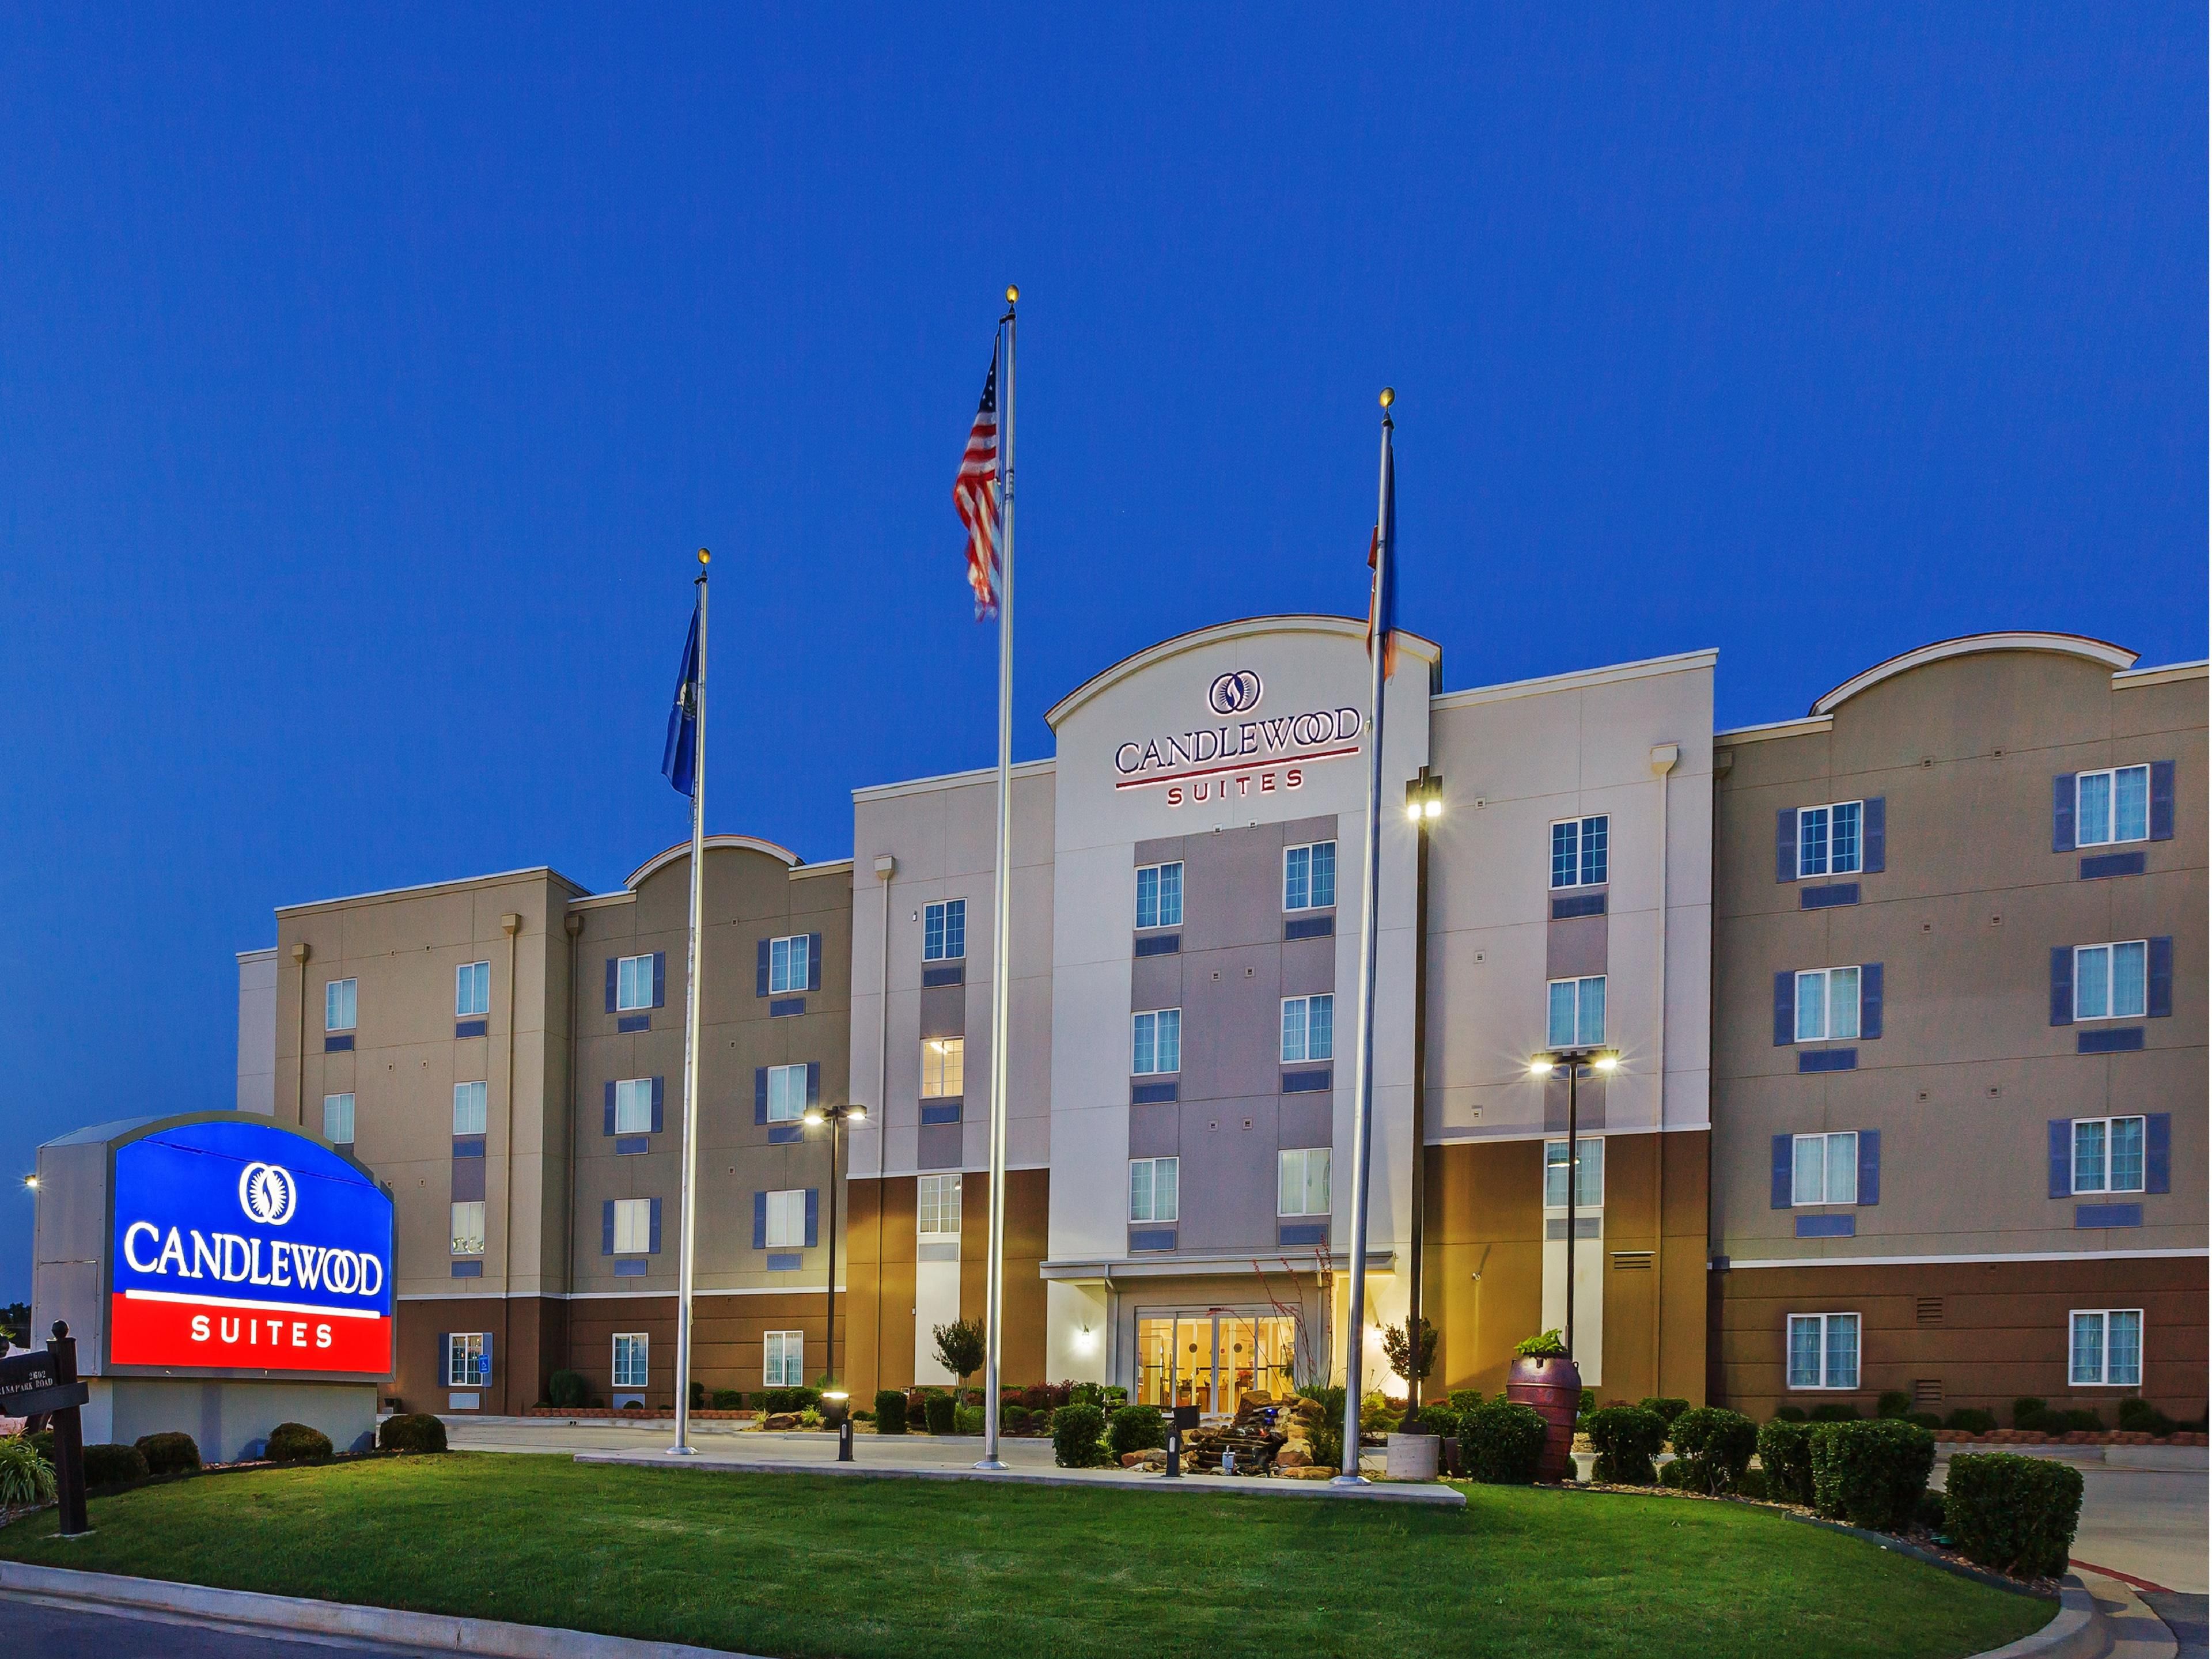 Ardmore Hotels Candlewood Suites Ardmore Extended Stay Hotel In Ardmore Oklahoma